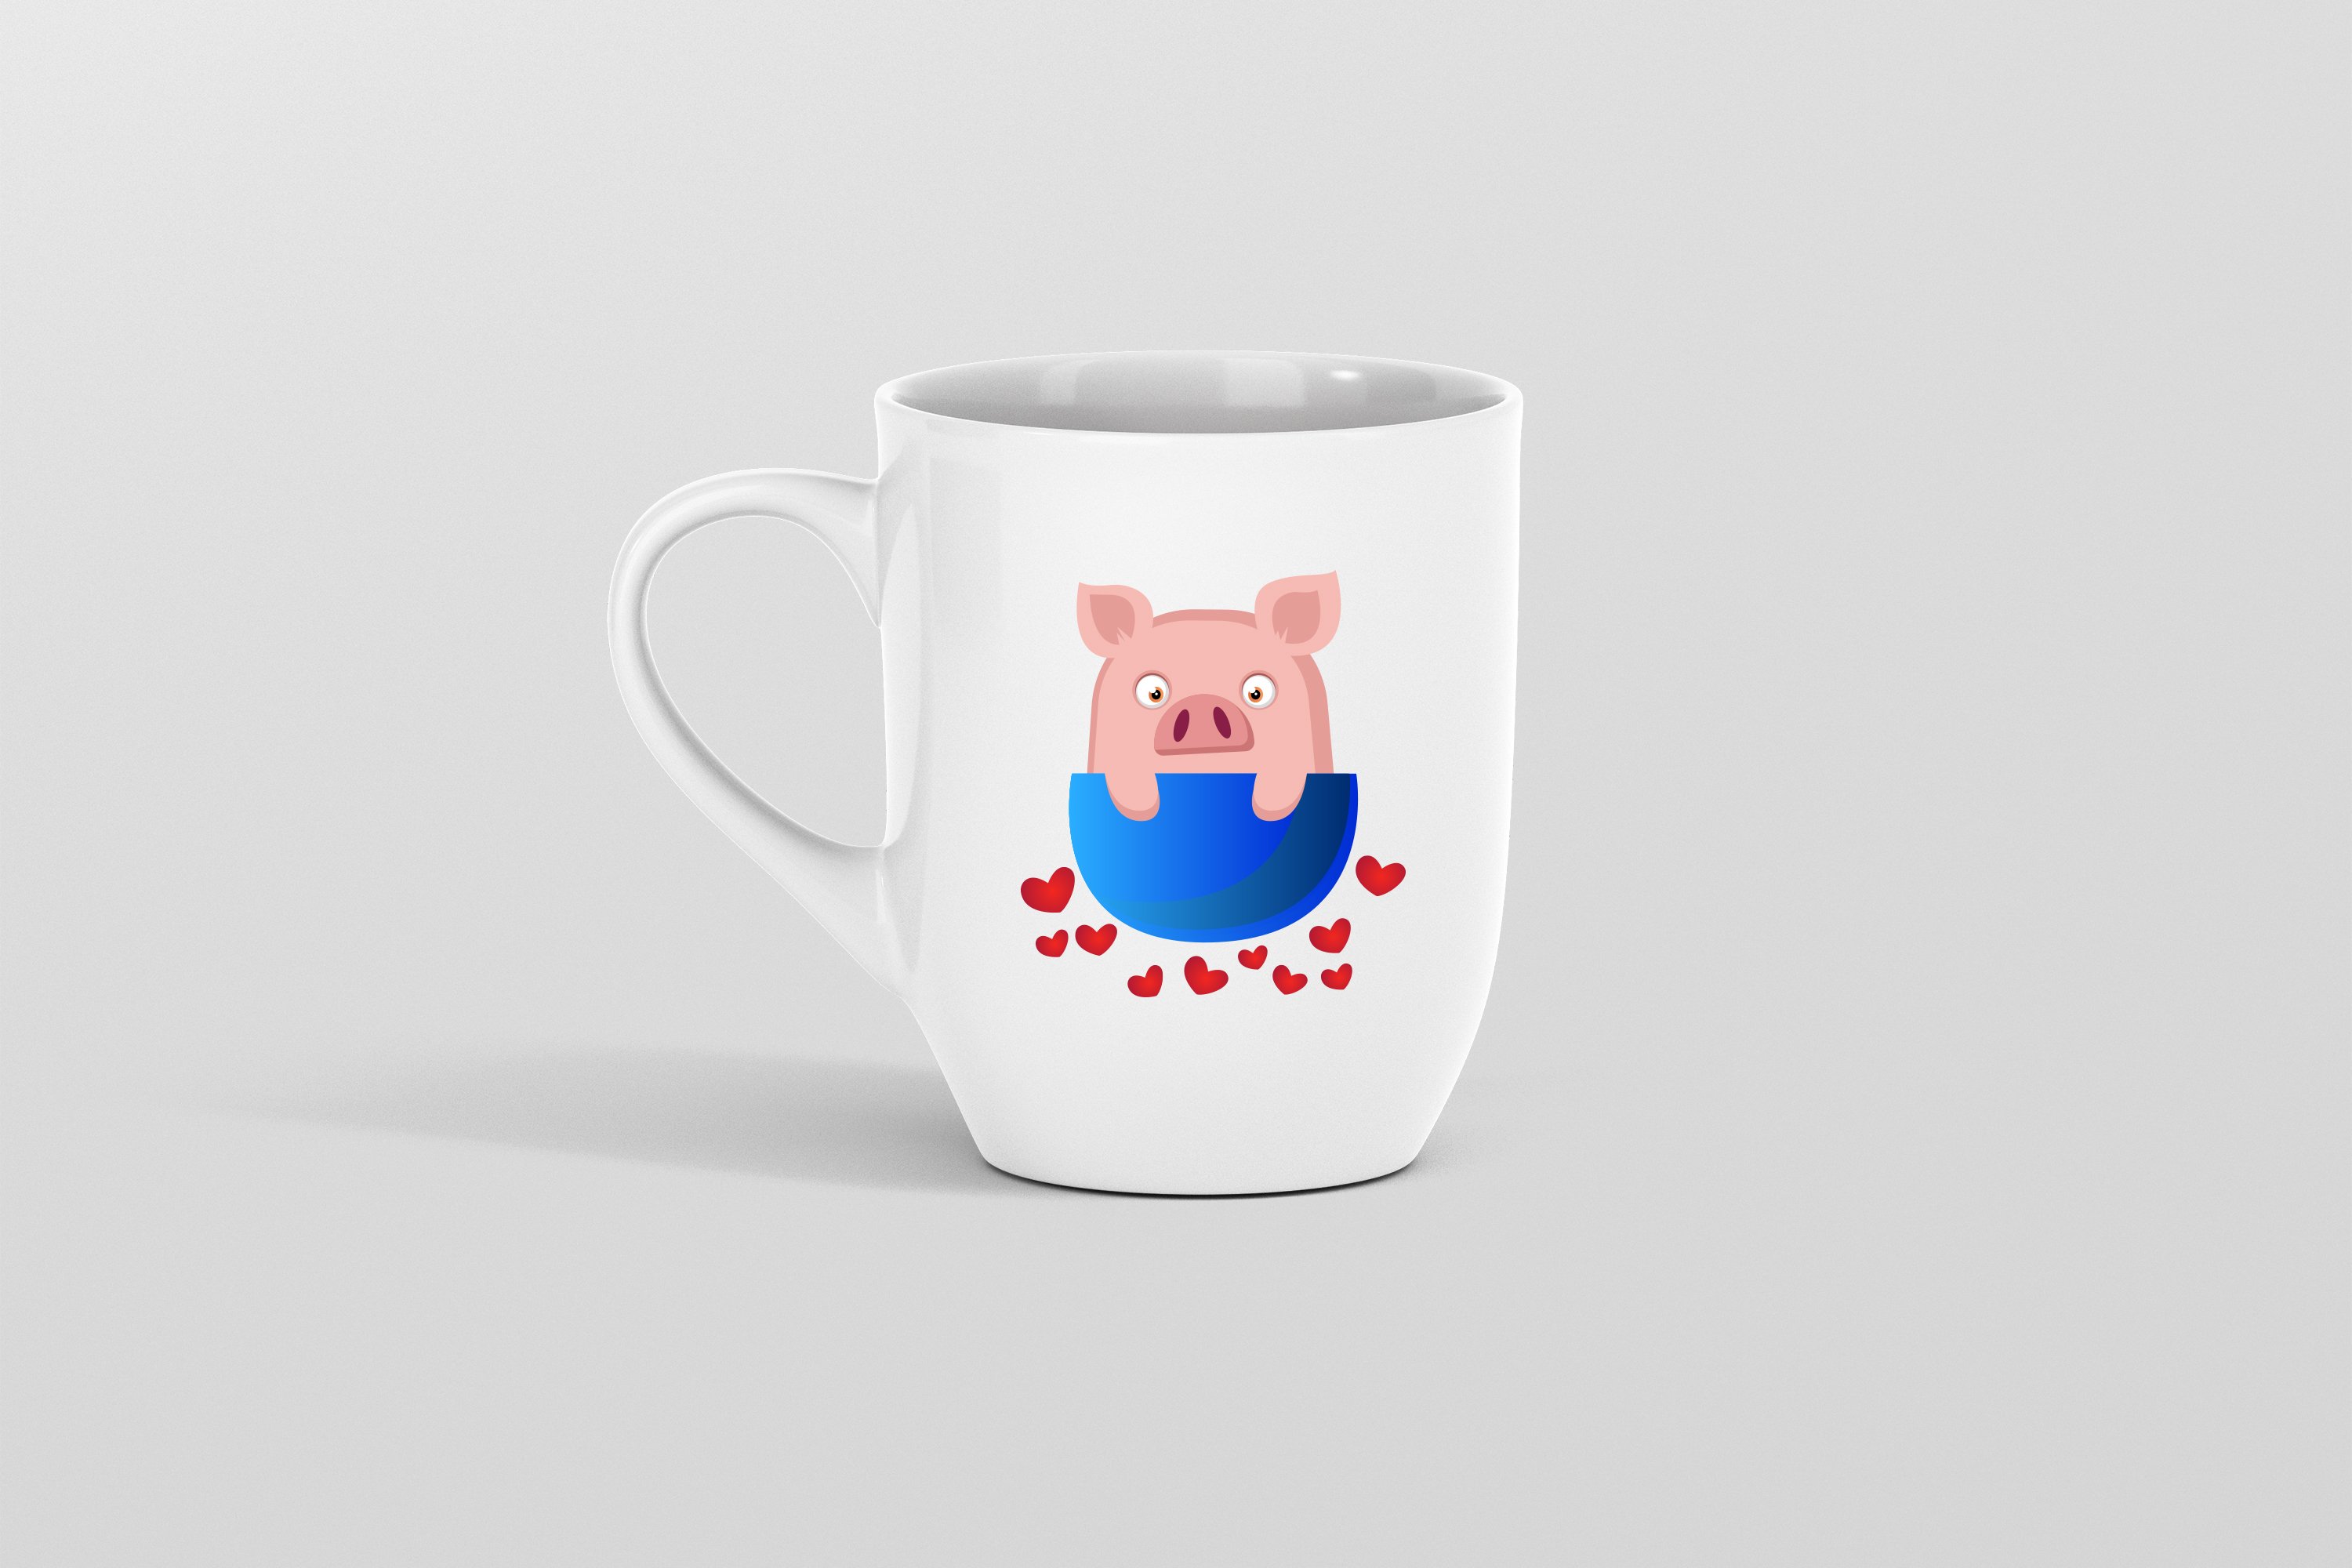 Image of a white cup with an adorable pig emoticon.